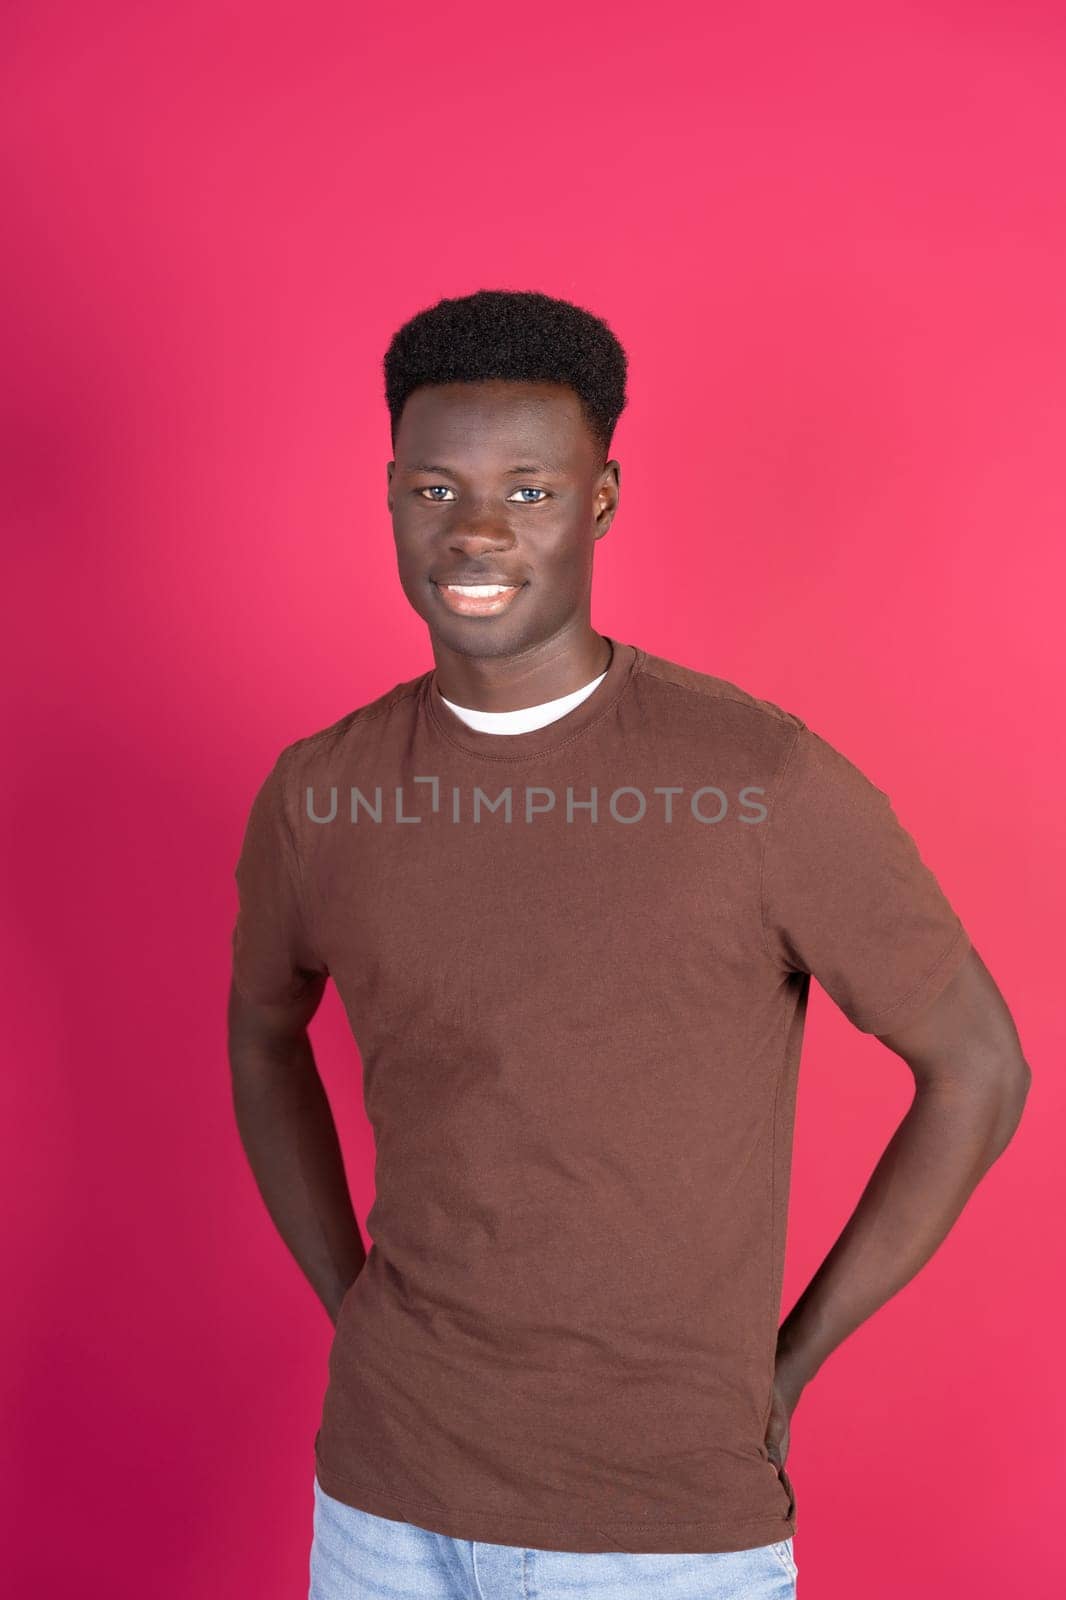 A man with a brown shirt and black hair is smiling for the camera. The image has a warm and friendly mood, with the man's smile and the bright pink background